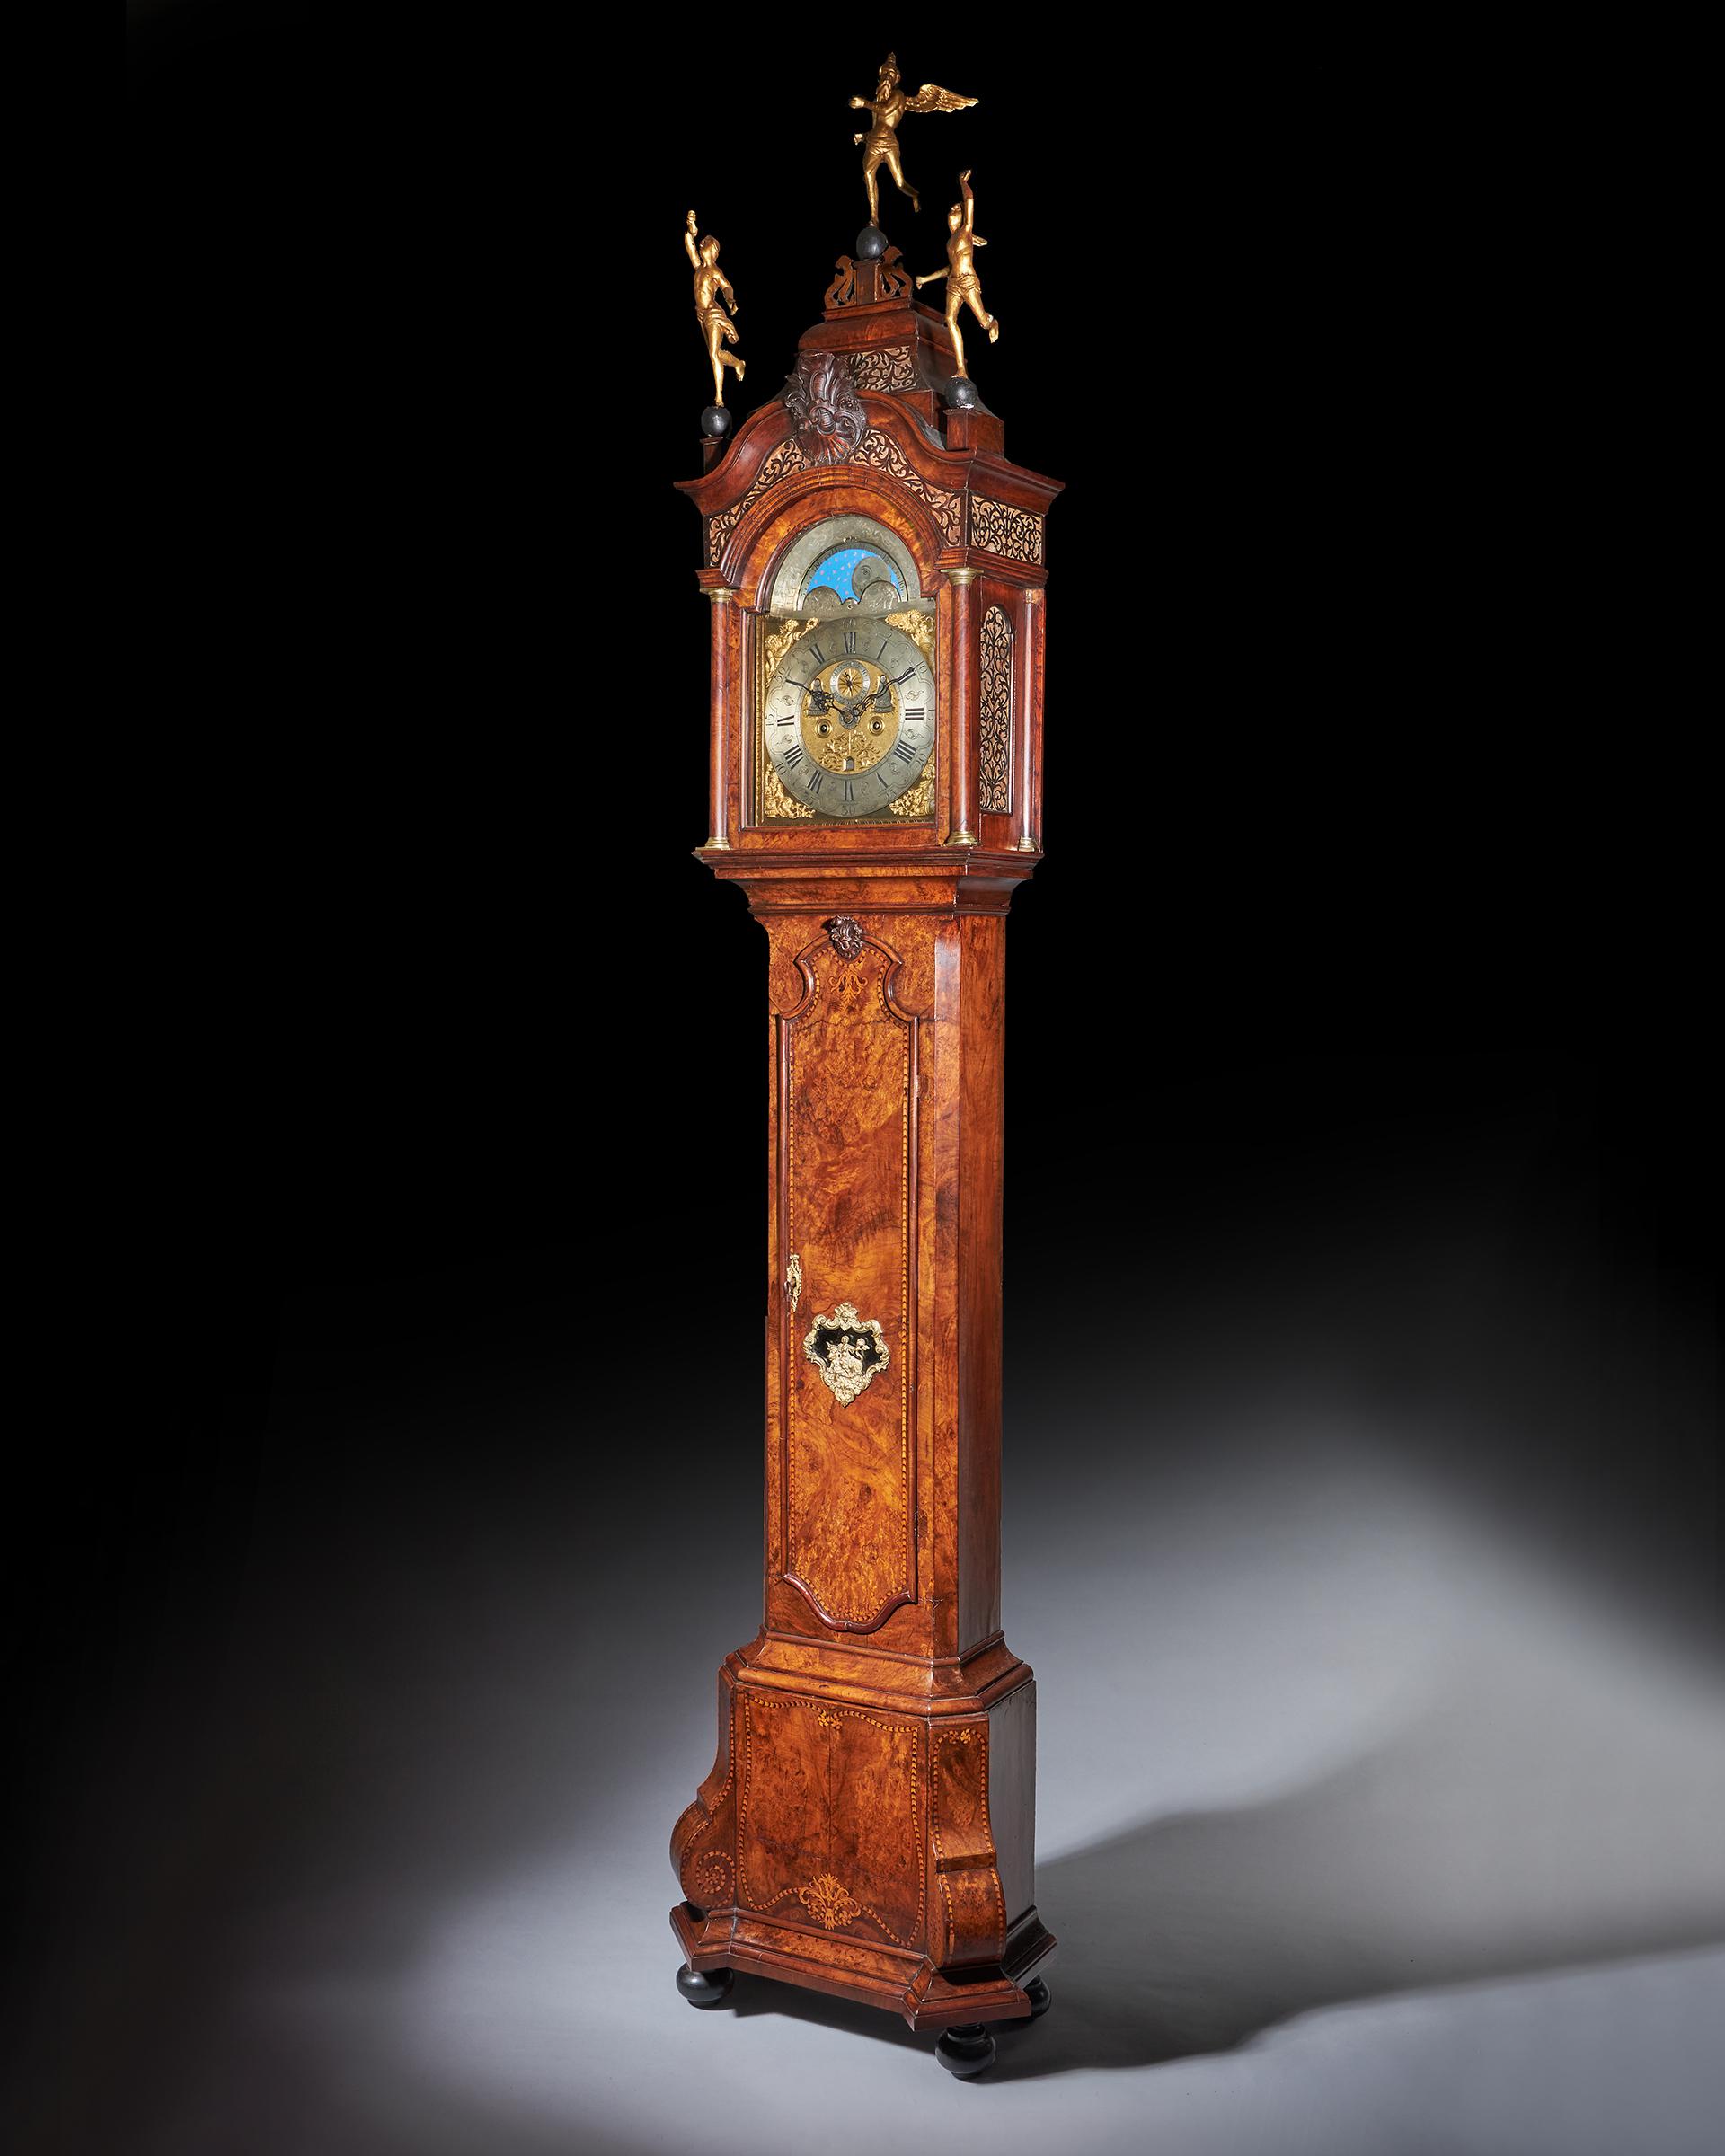 An impressive Dutch longcase clock with a burr walnut veneered oak case, signed on the chapter ring Pieter Brandt Amsterdam, c. 1745-50. The hood of this clock has a broken arch top pediment with very fine elaborate fretwork functioning as sound